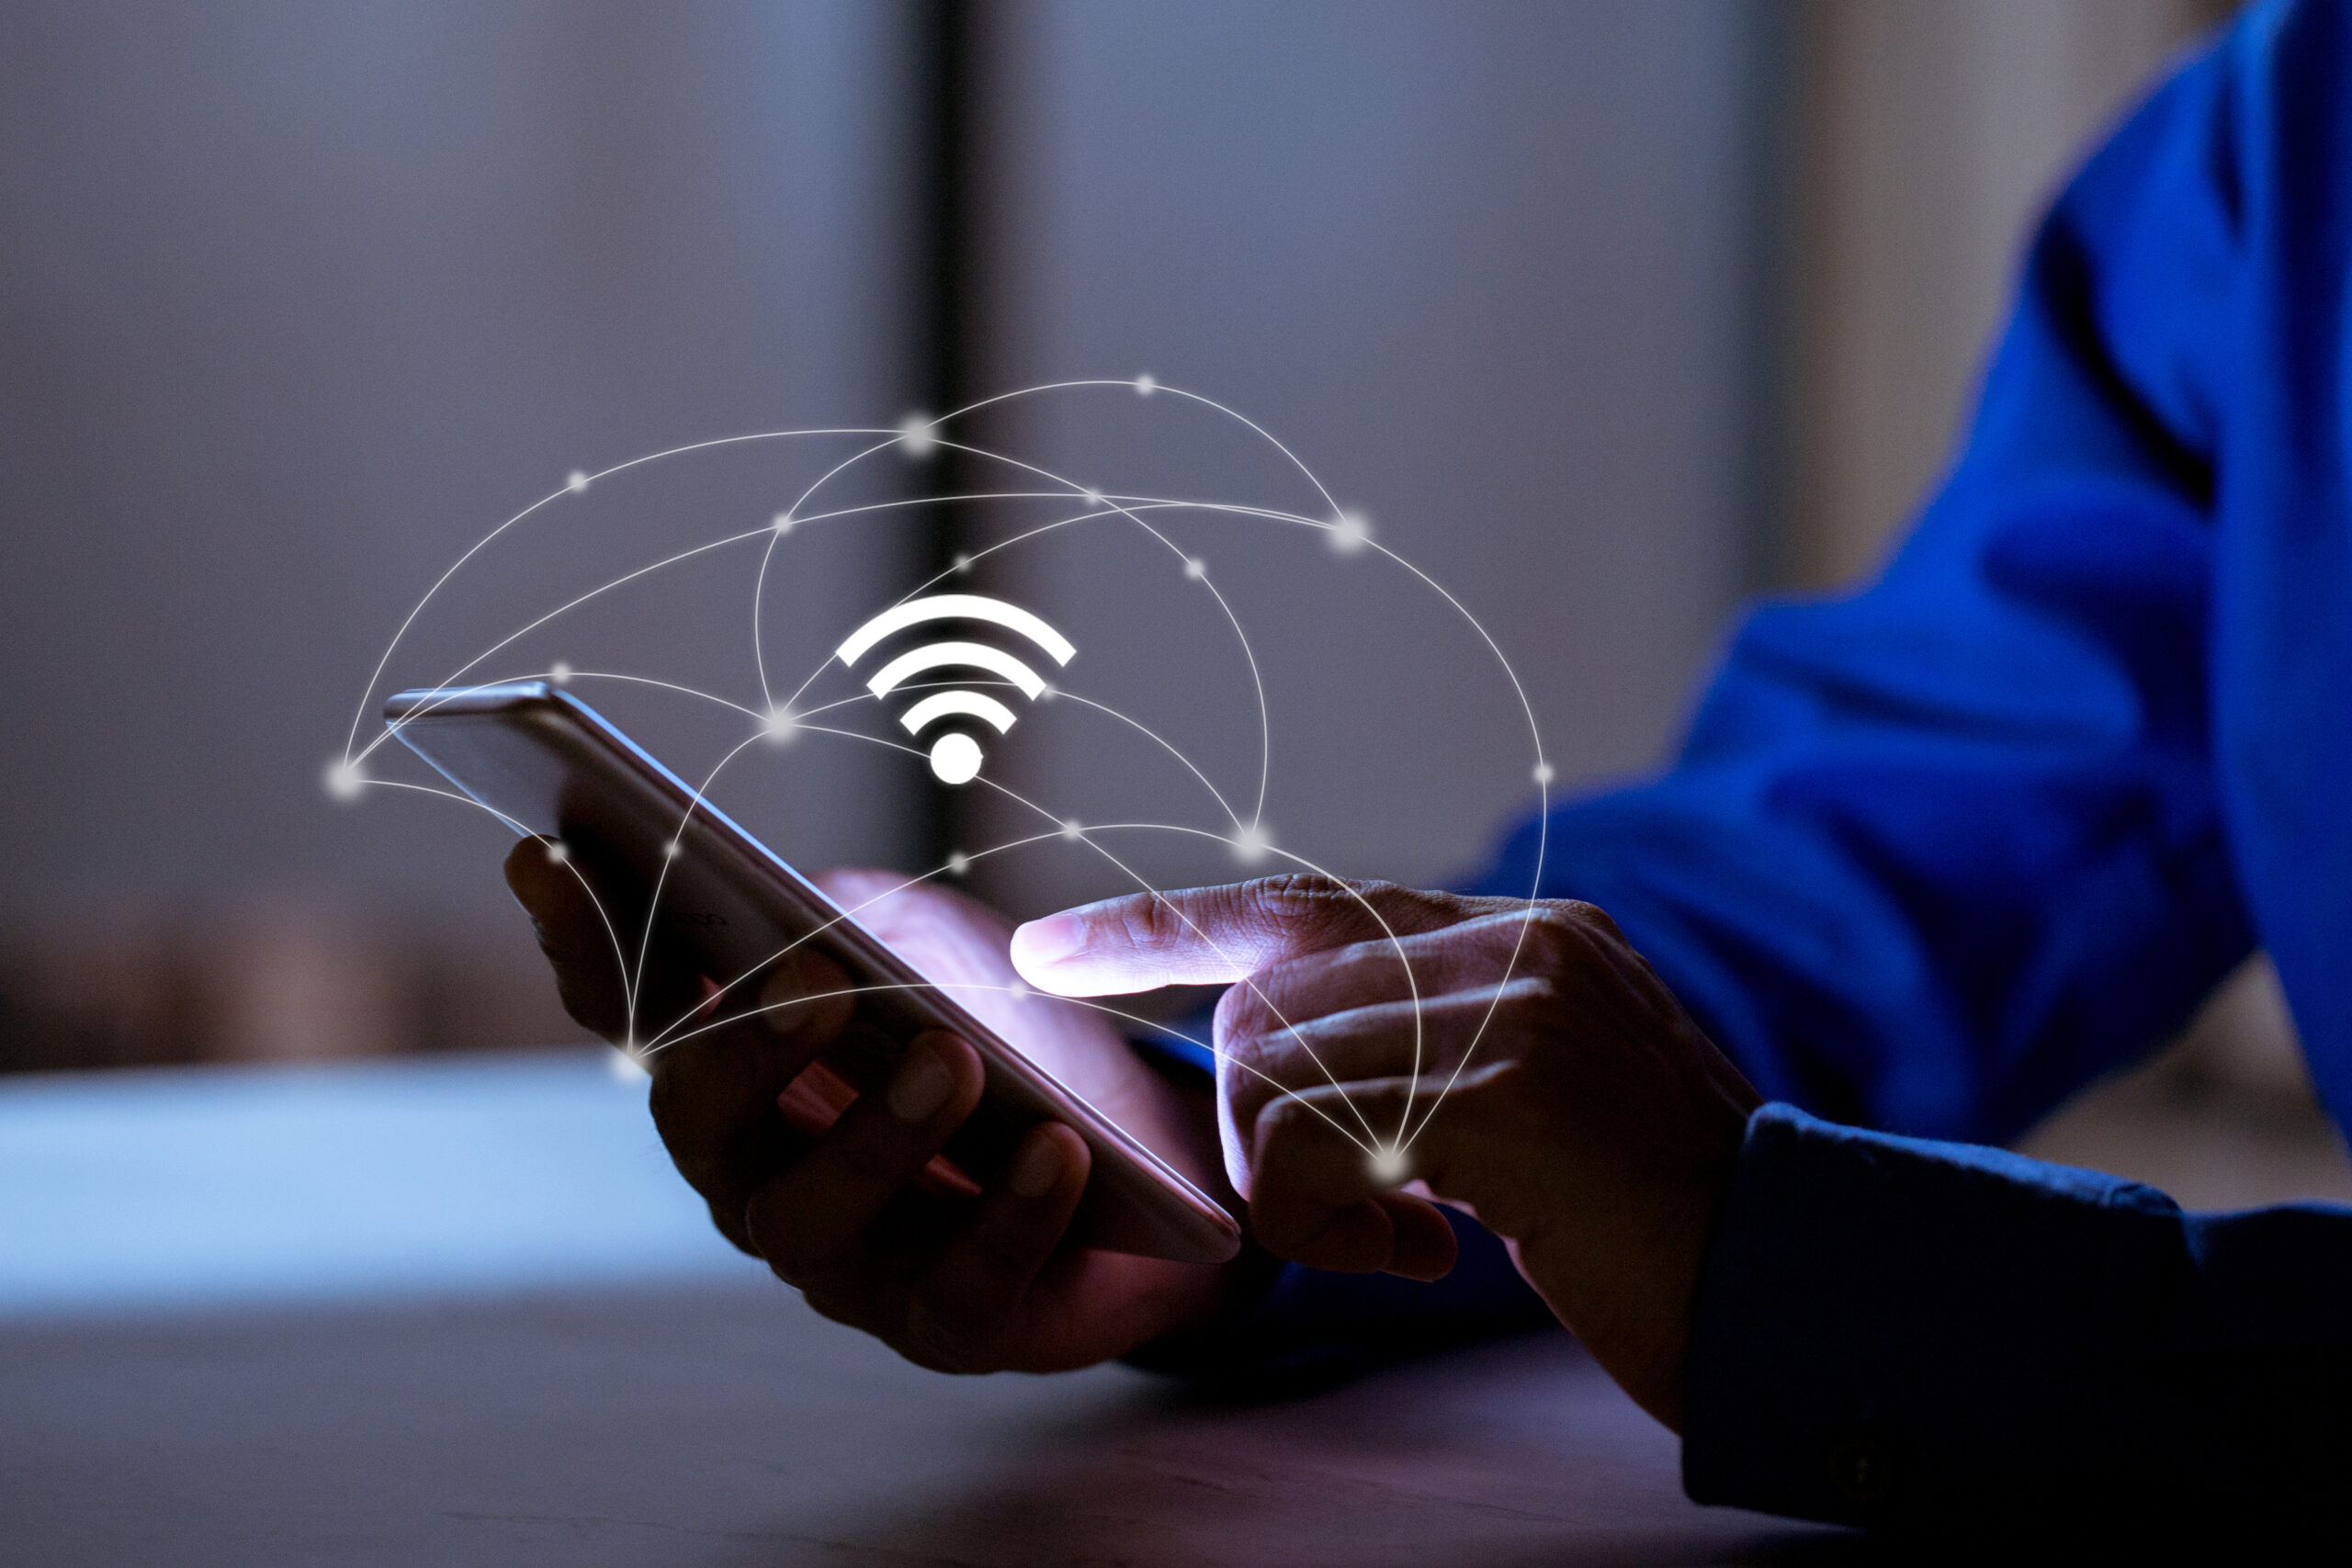 Your cell phone uses mobile data even on Wi-Fi; it understands.